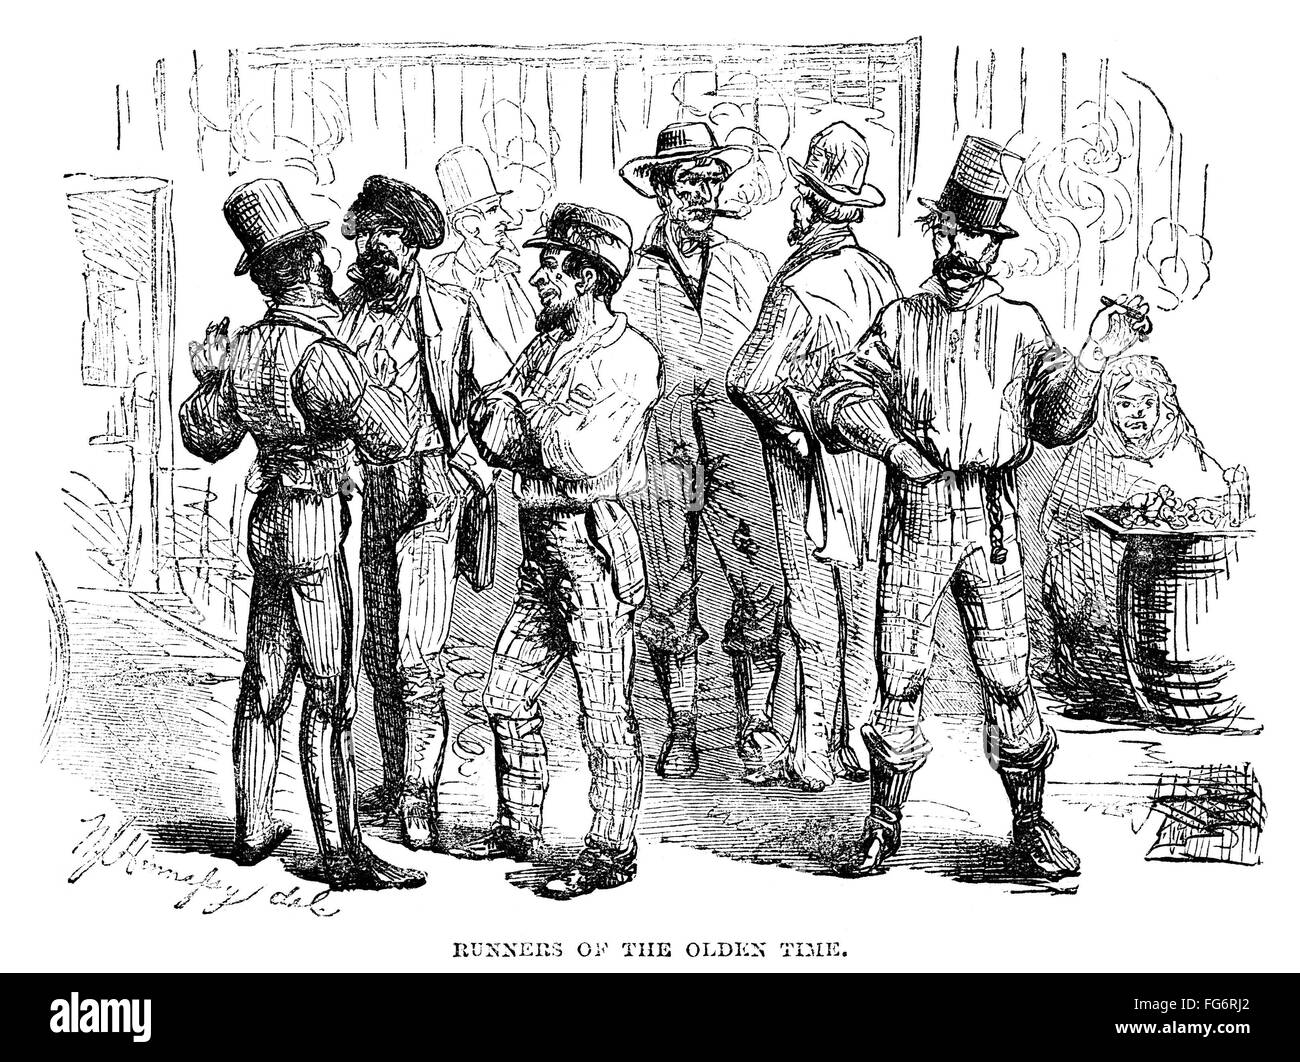 IMMIGRANT RUNNERS, 1858. /n'Runners of the Olden Time.' Immigrant runners, men who would exploit newly arrived immigrants in New York City. Wood engraving, American, 1858. Stock Photo